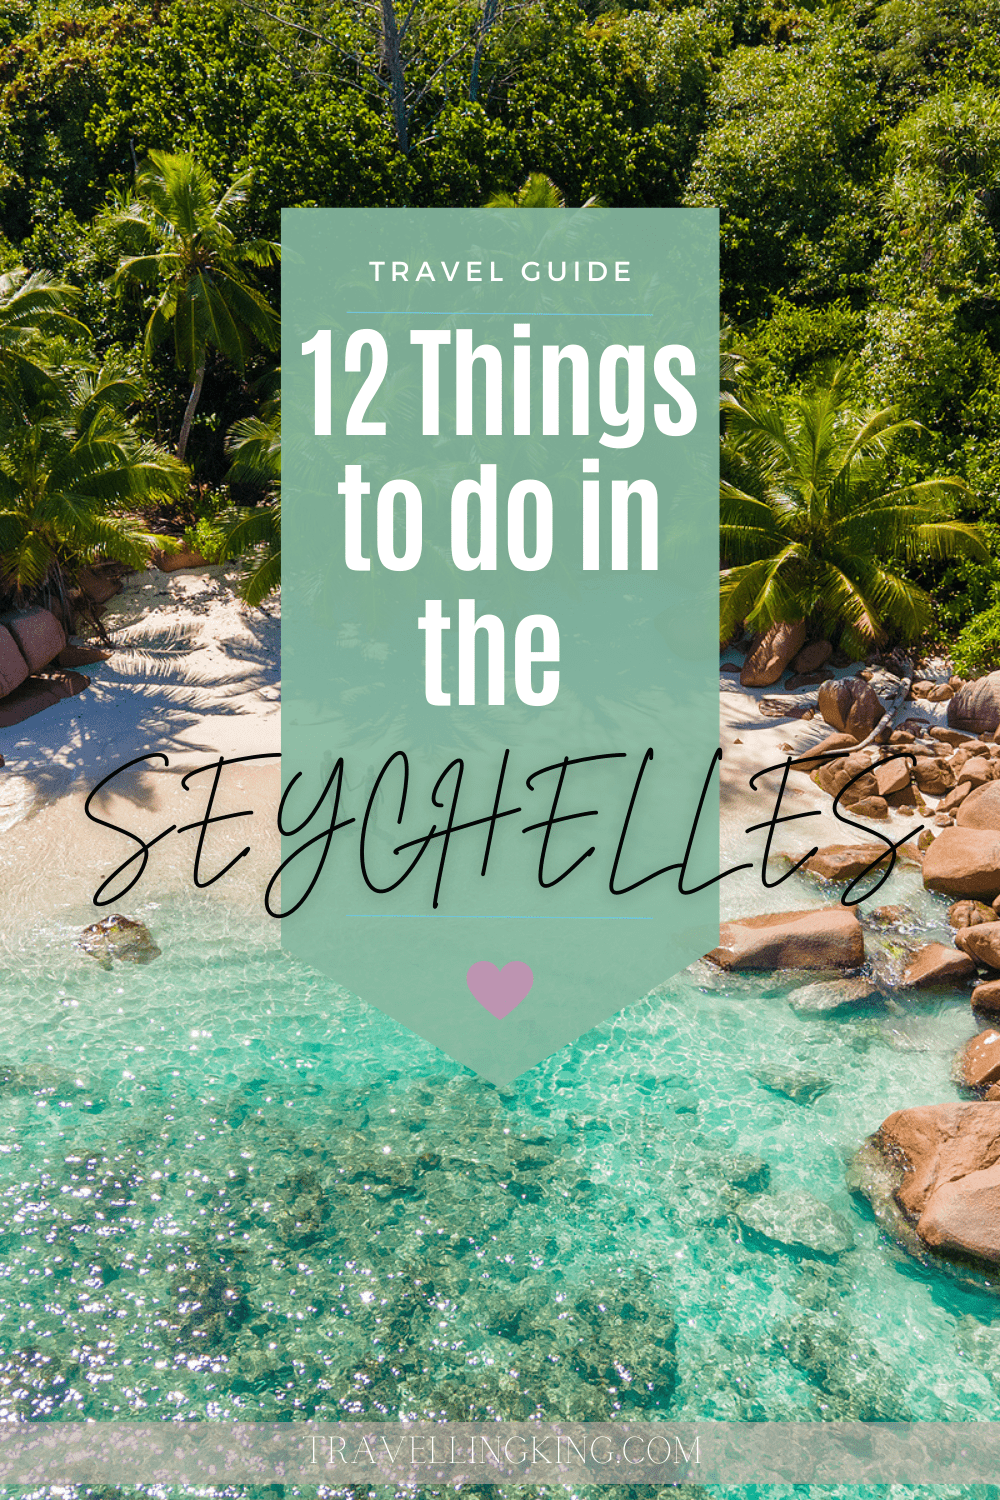 12 Things to do in the Seychelles